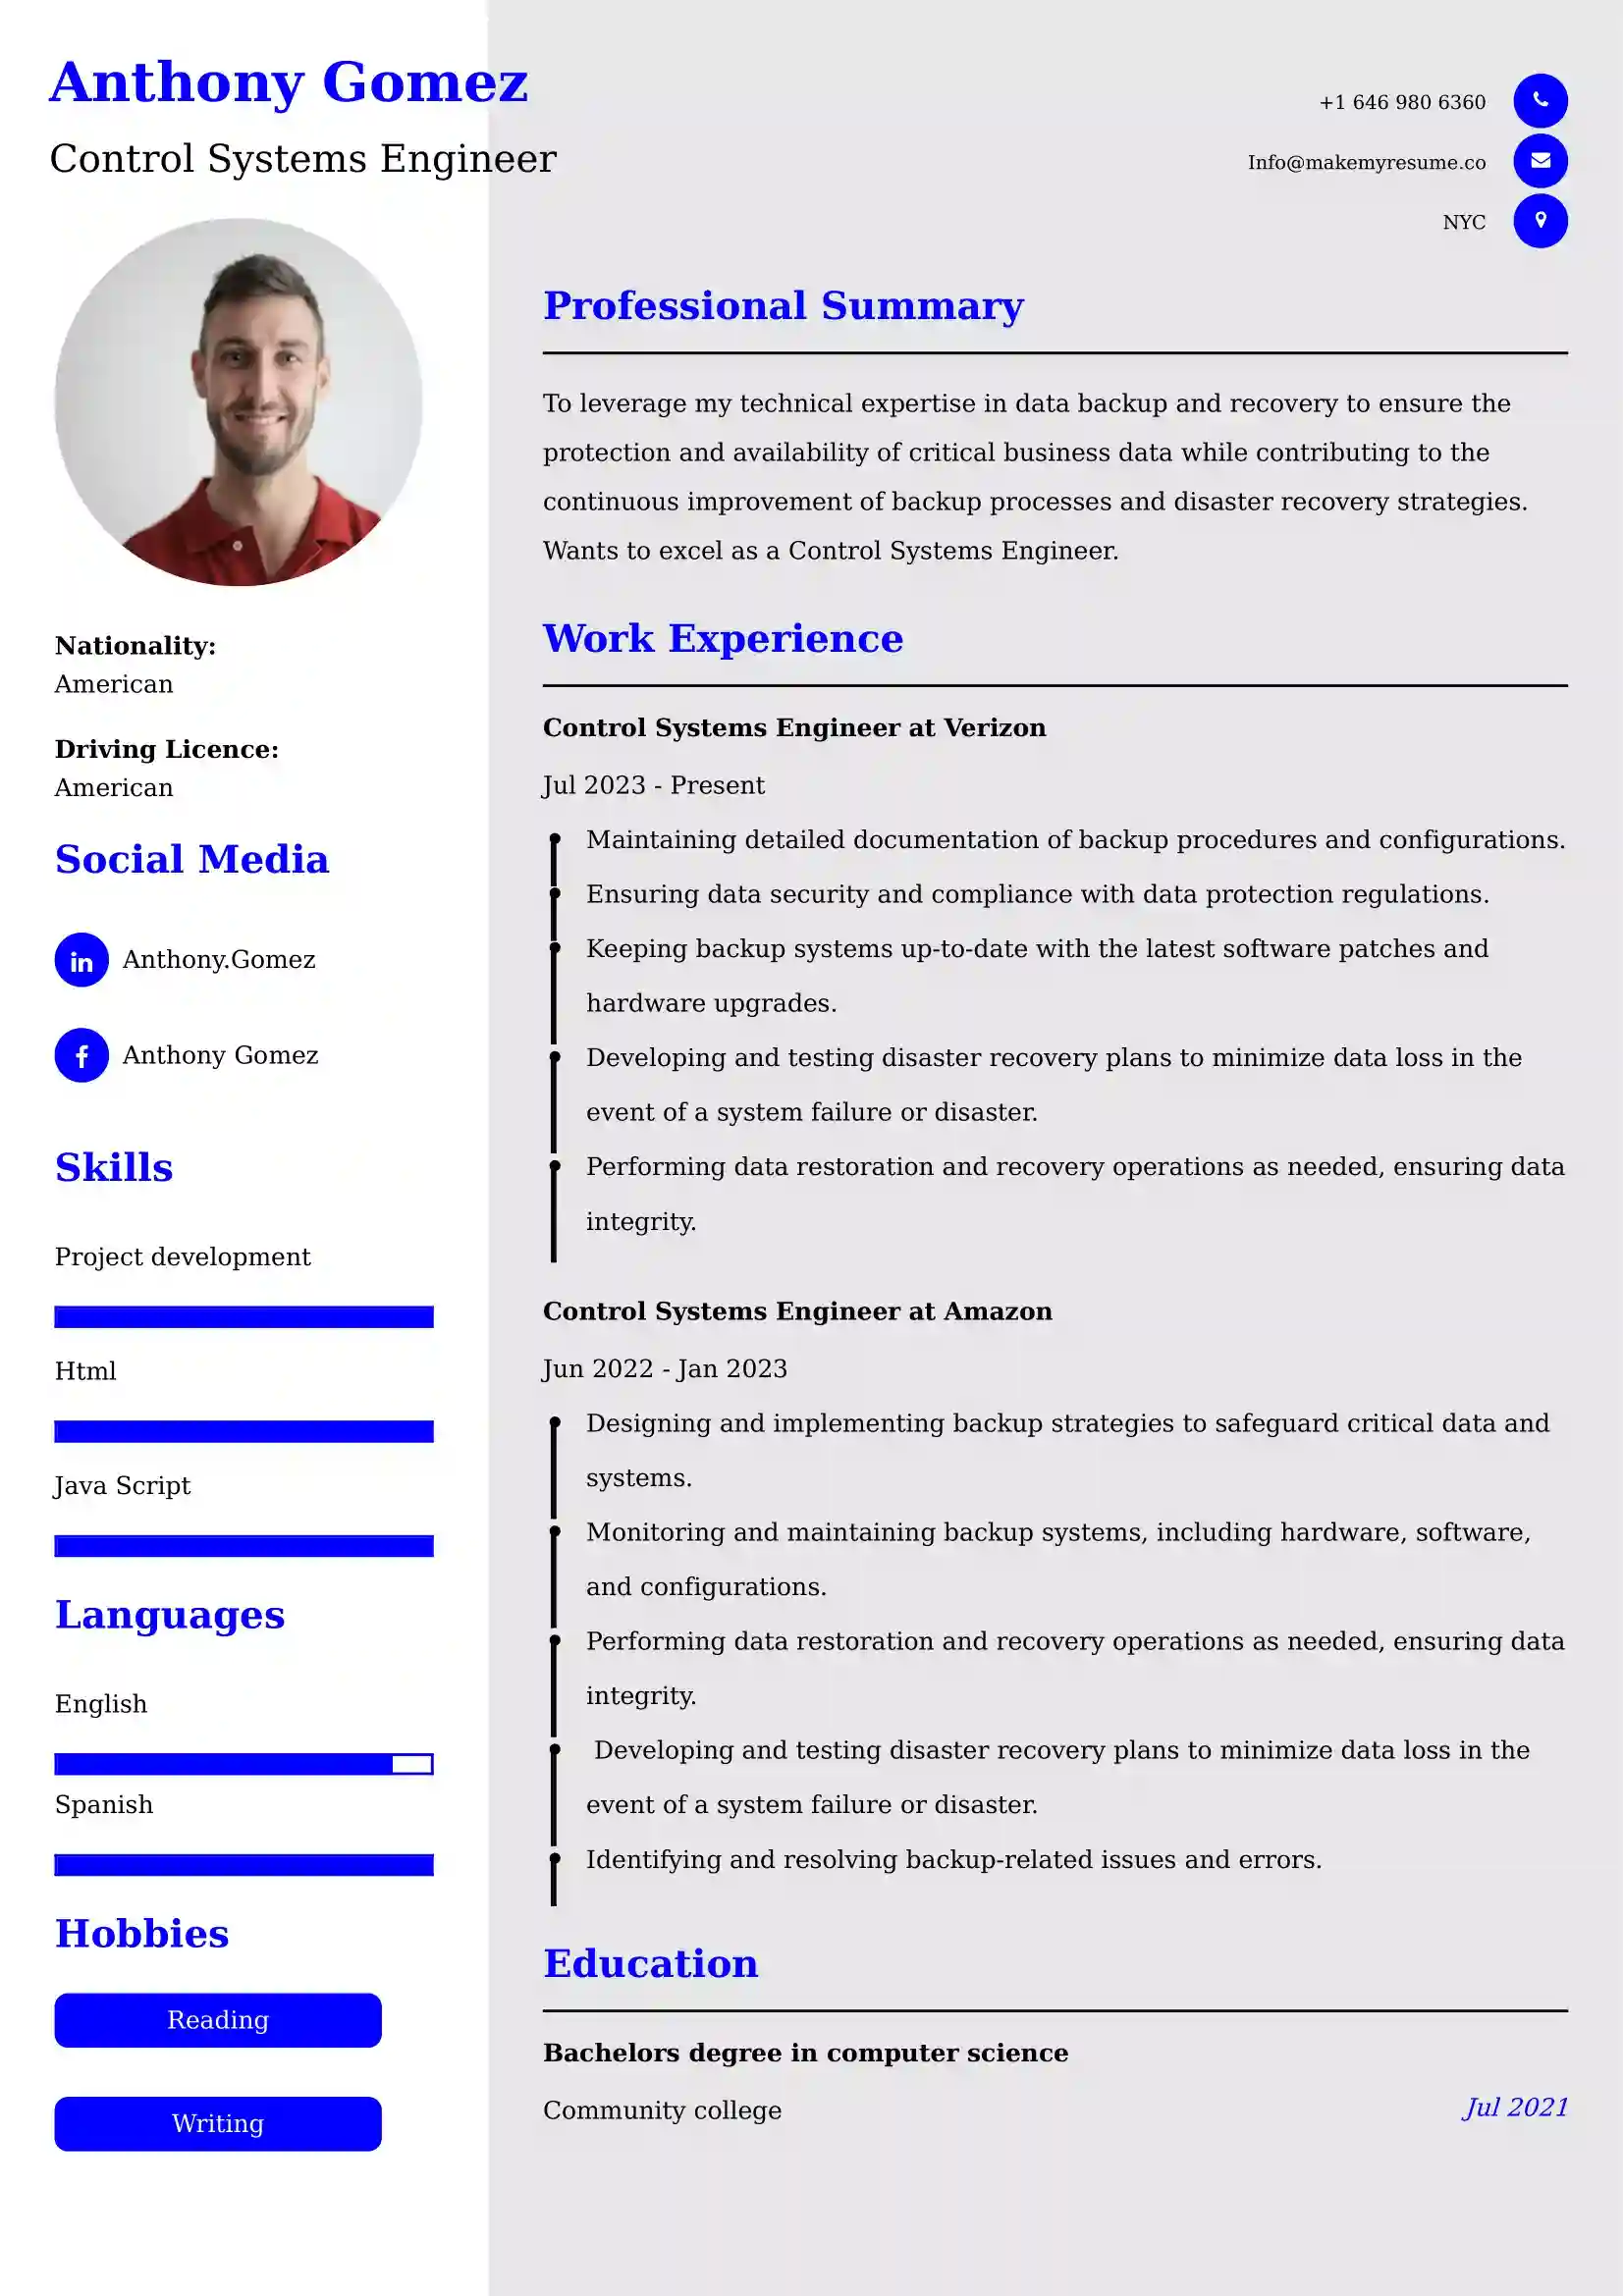 Control Systems Engineer Resume Examples - UK Format, Latest Template.